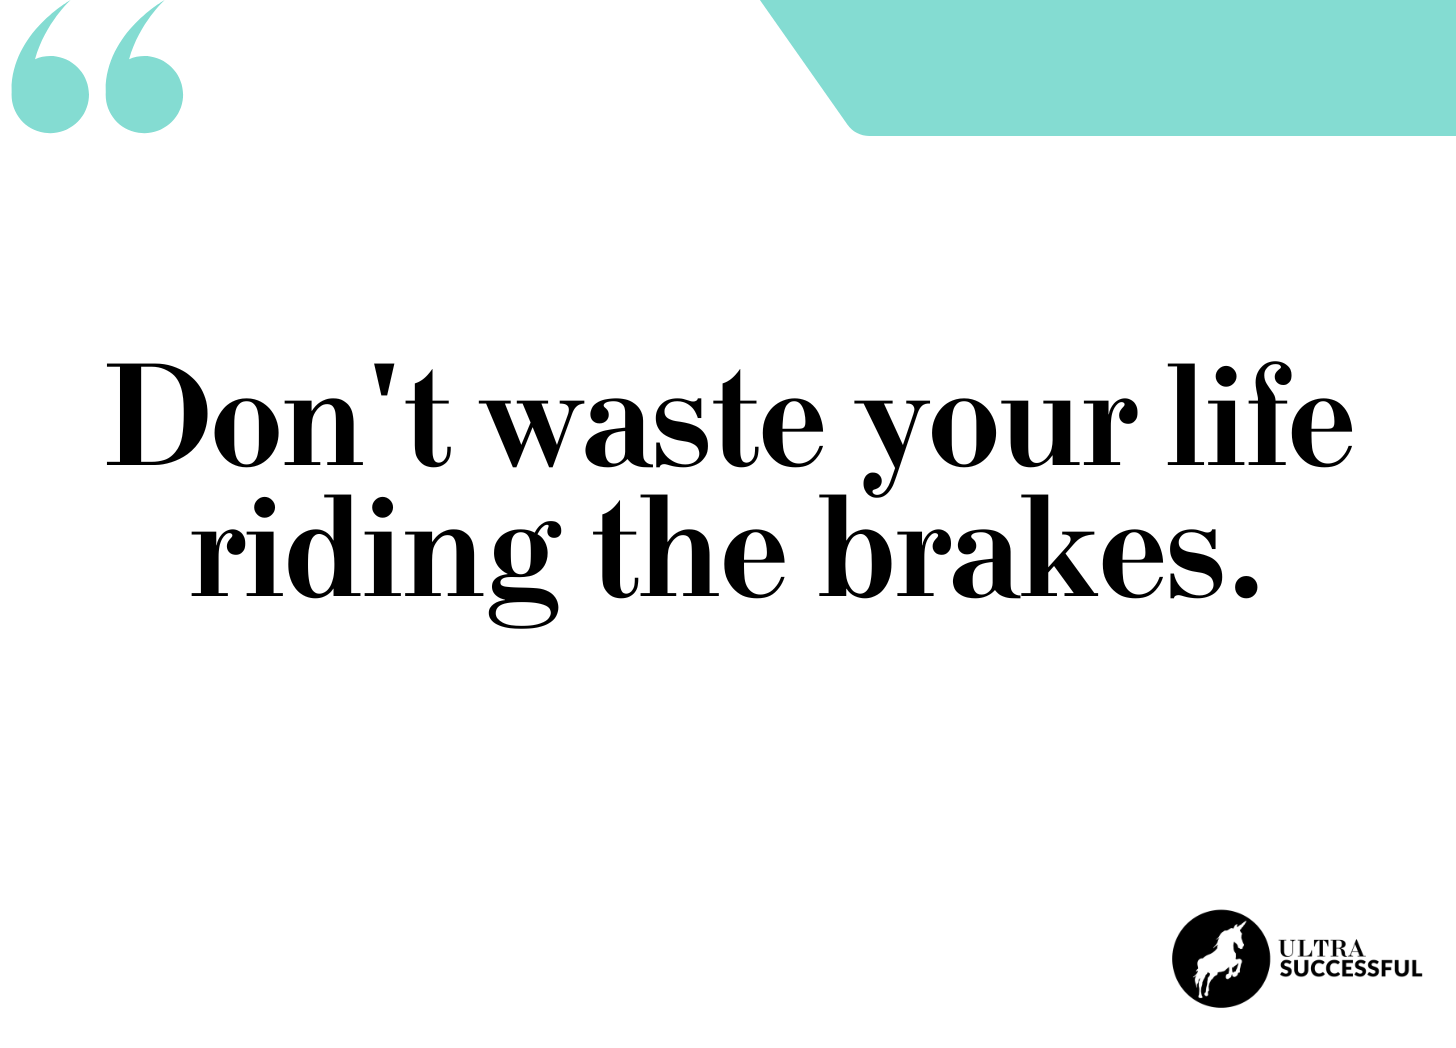 Don't waste your life riding the brakes.